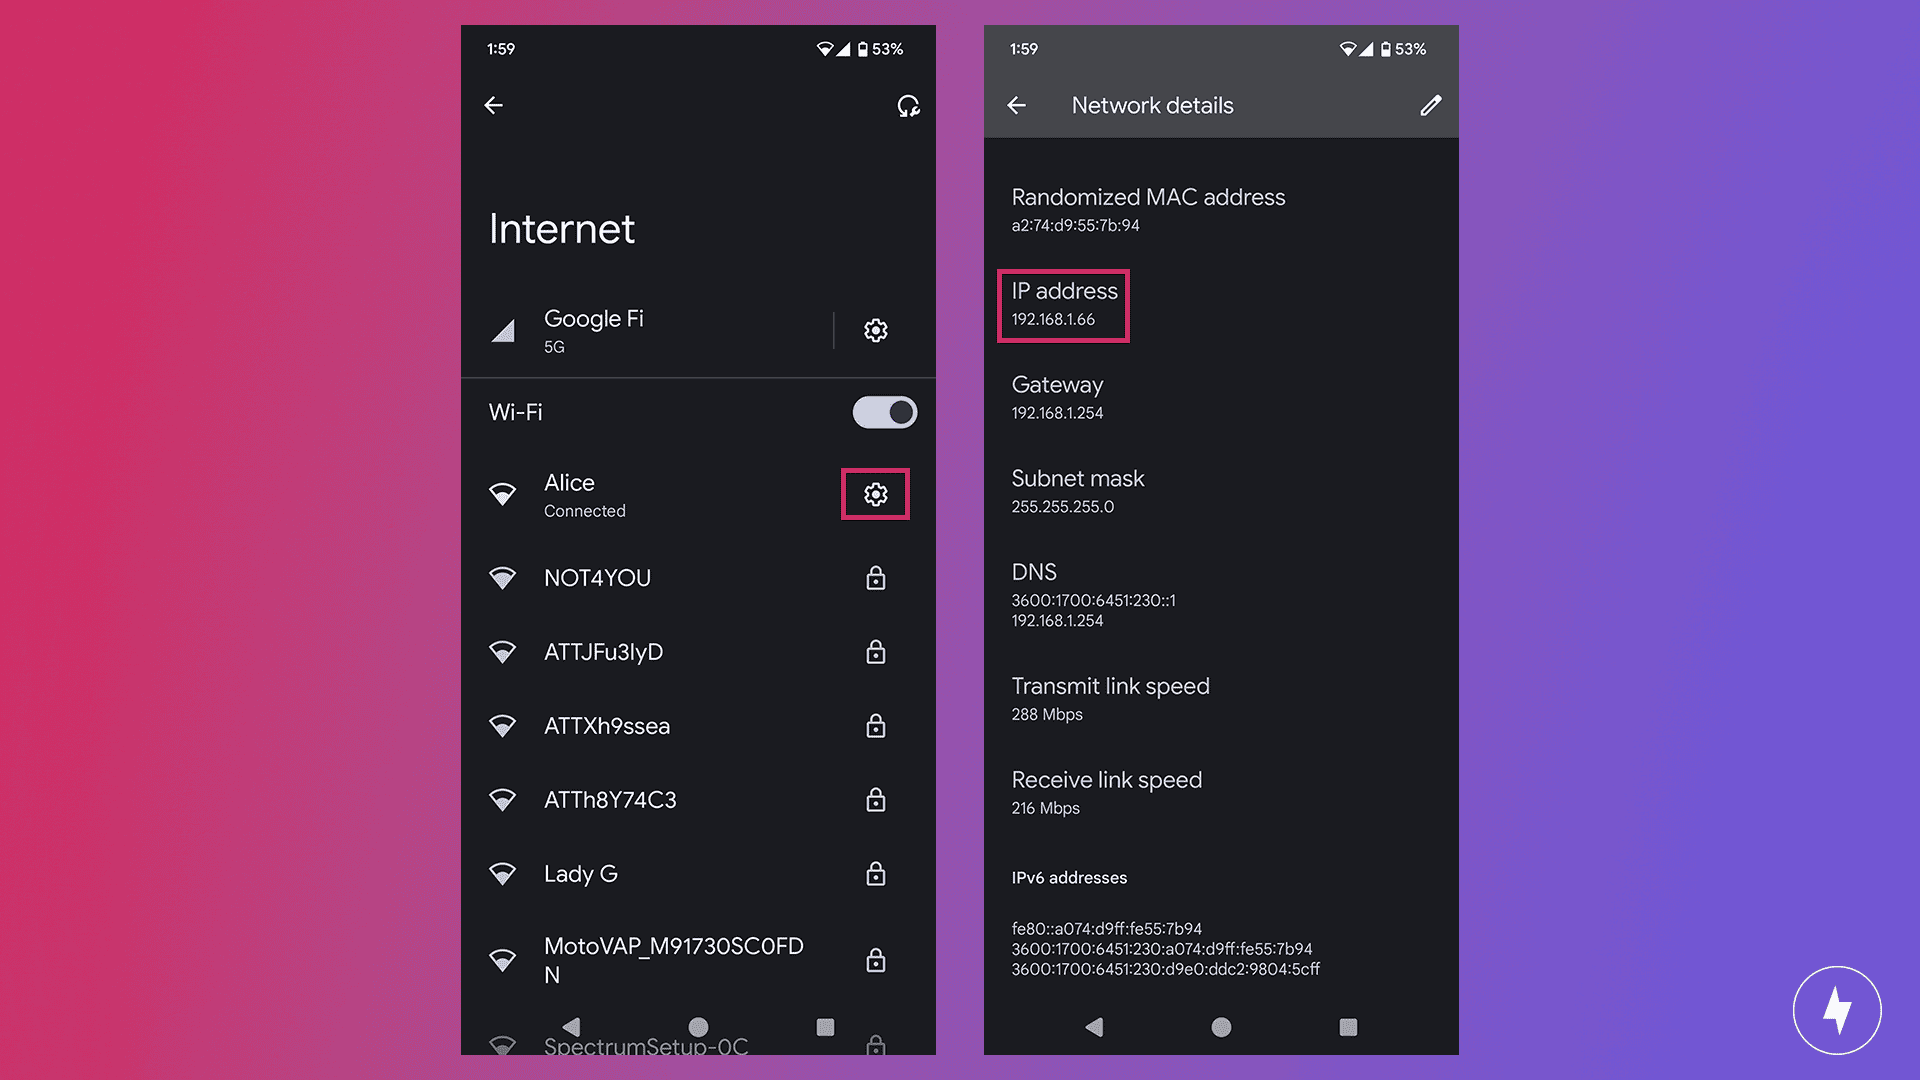 Screenshot showing Wi-Fi settings and IP address for Android